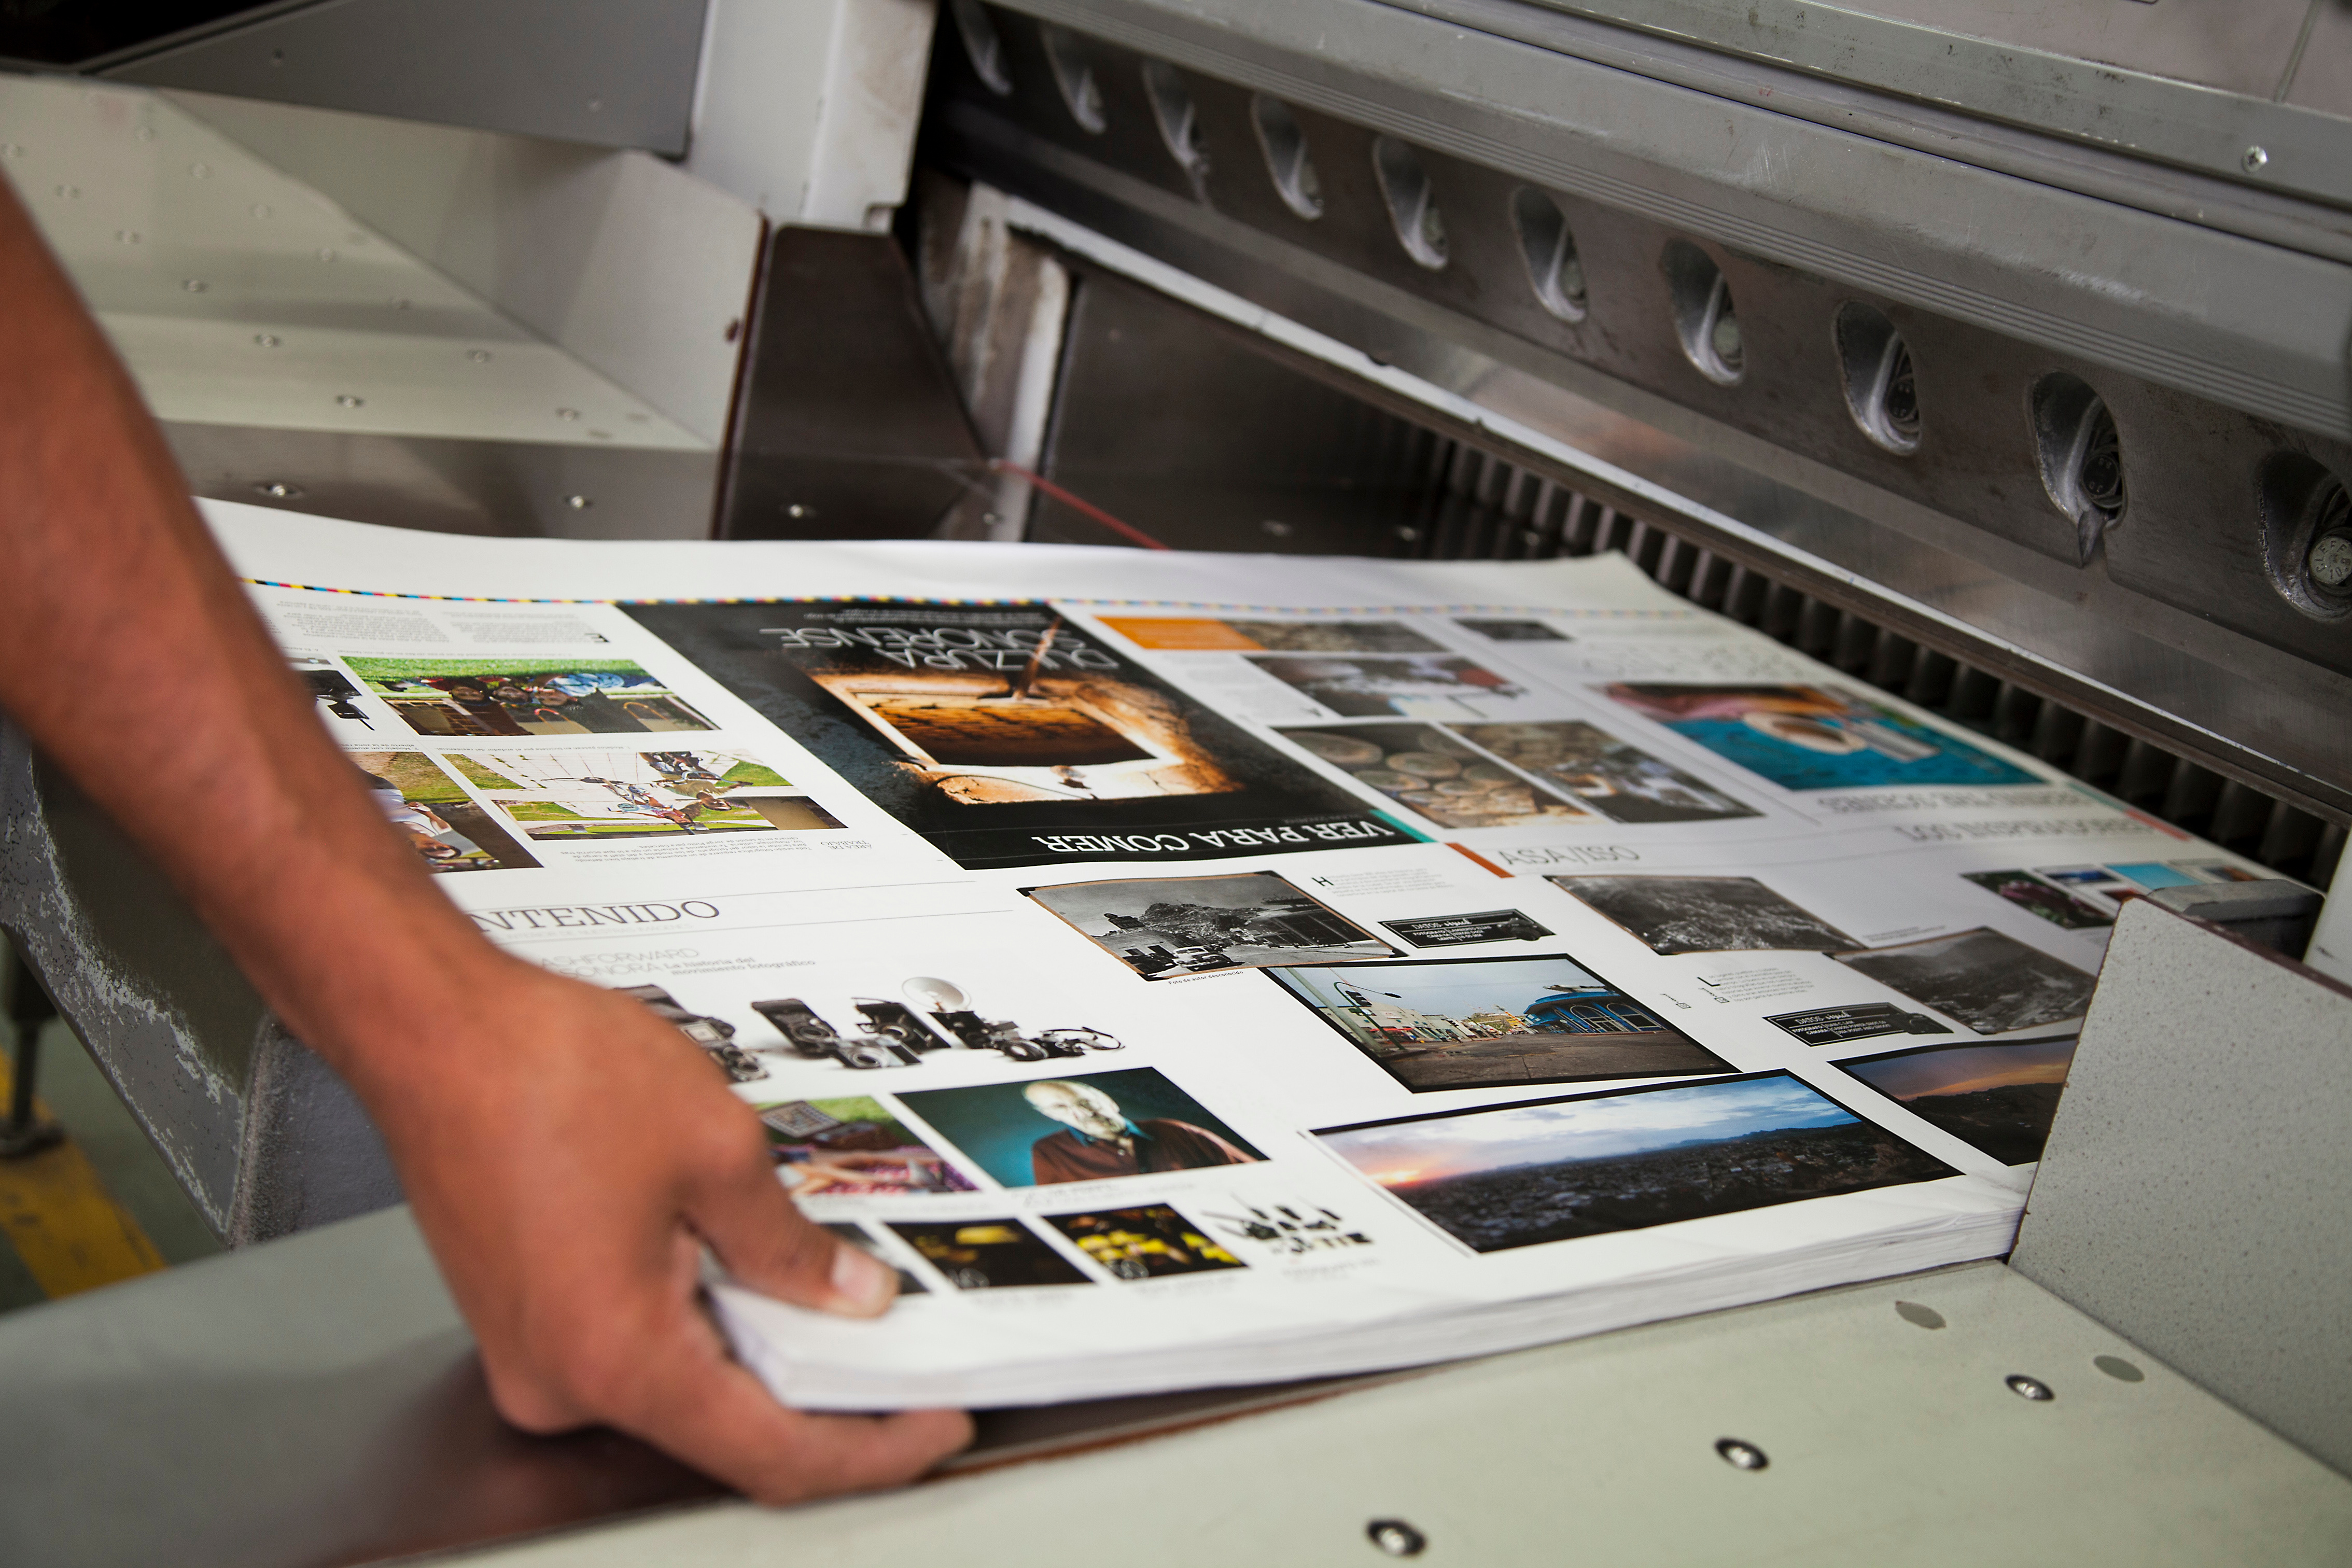 A person takes a stack of printed catalogs off a printer.